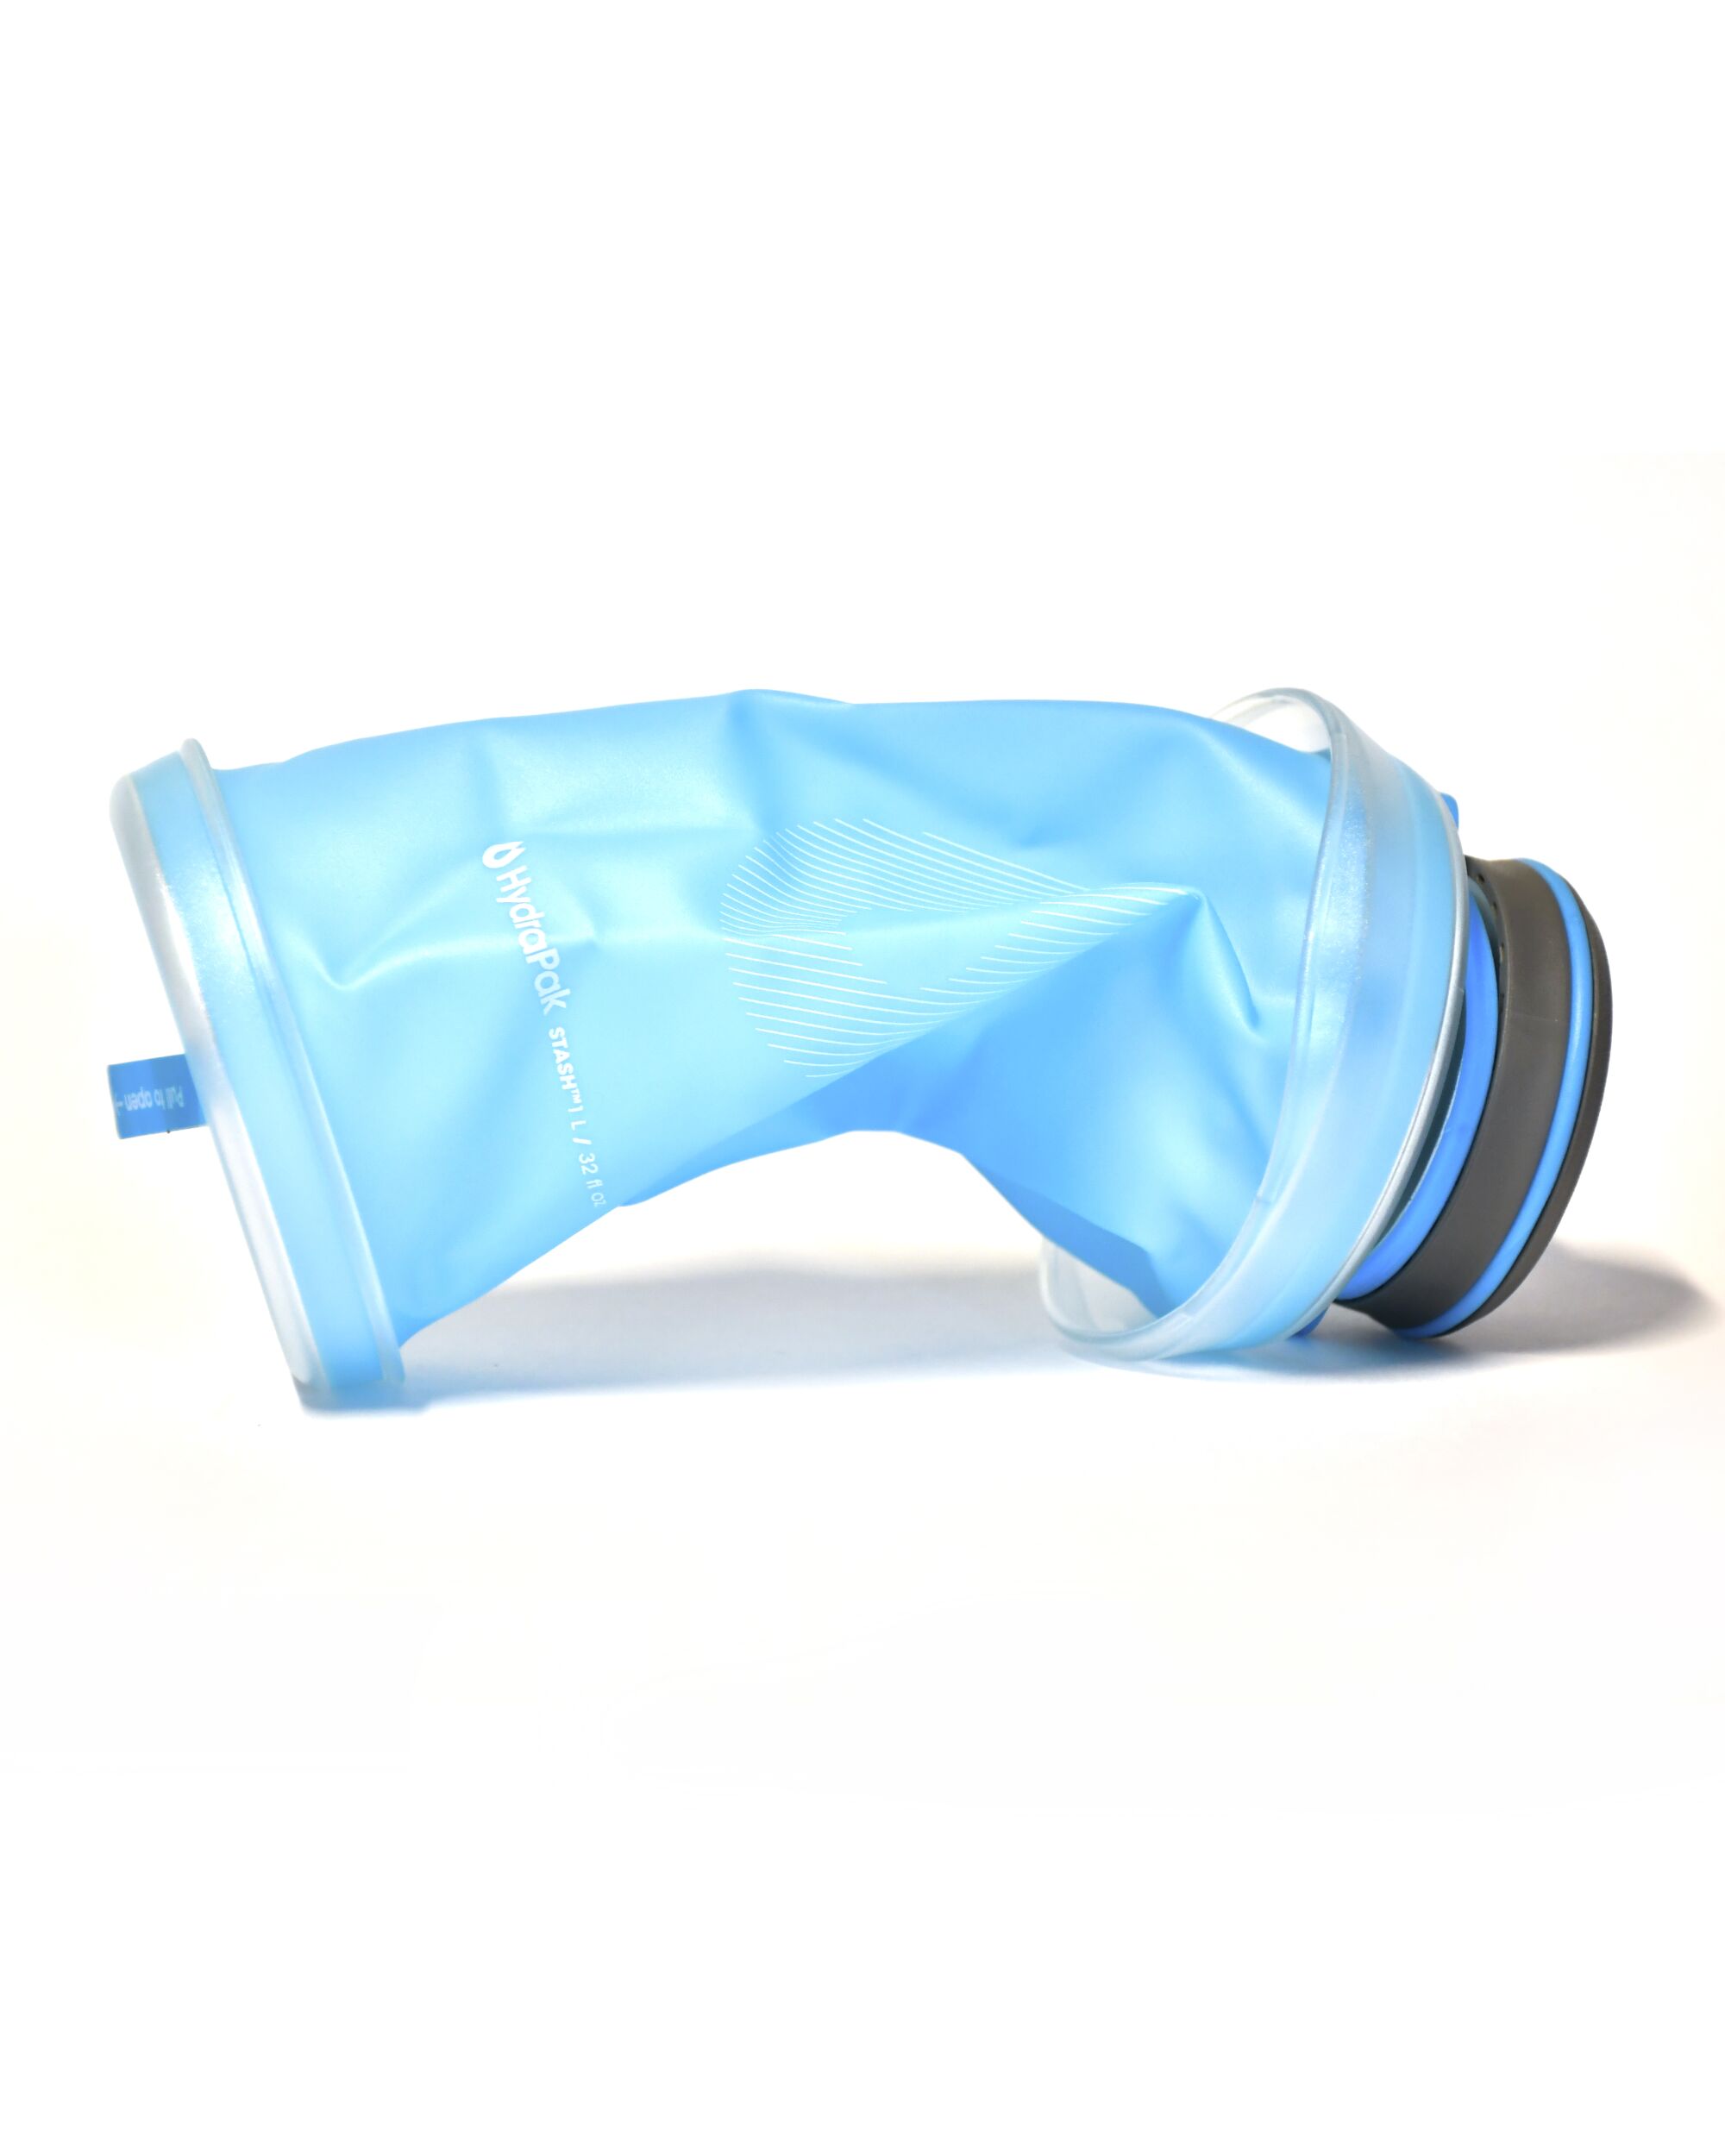 Hydrapak Stash, a 1 liter collapsible water bottle